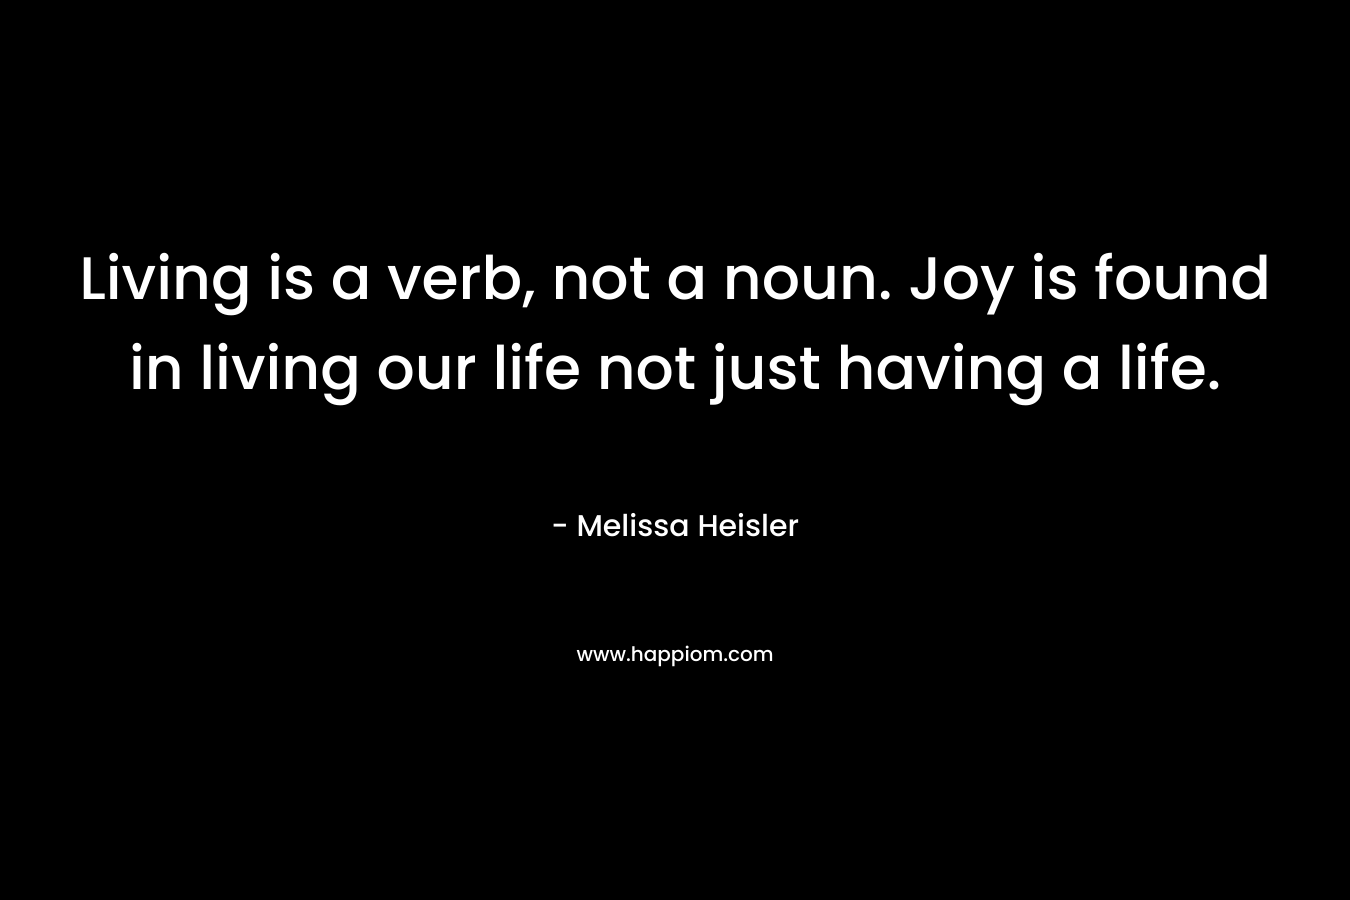 Living is a verb, not a noun. Joy is found in living our life not just having a life. – Melissa Heisler